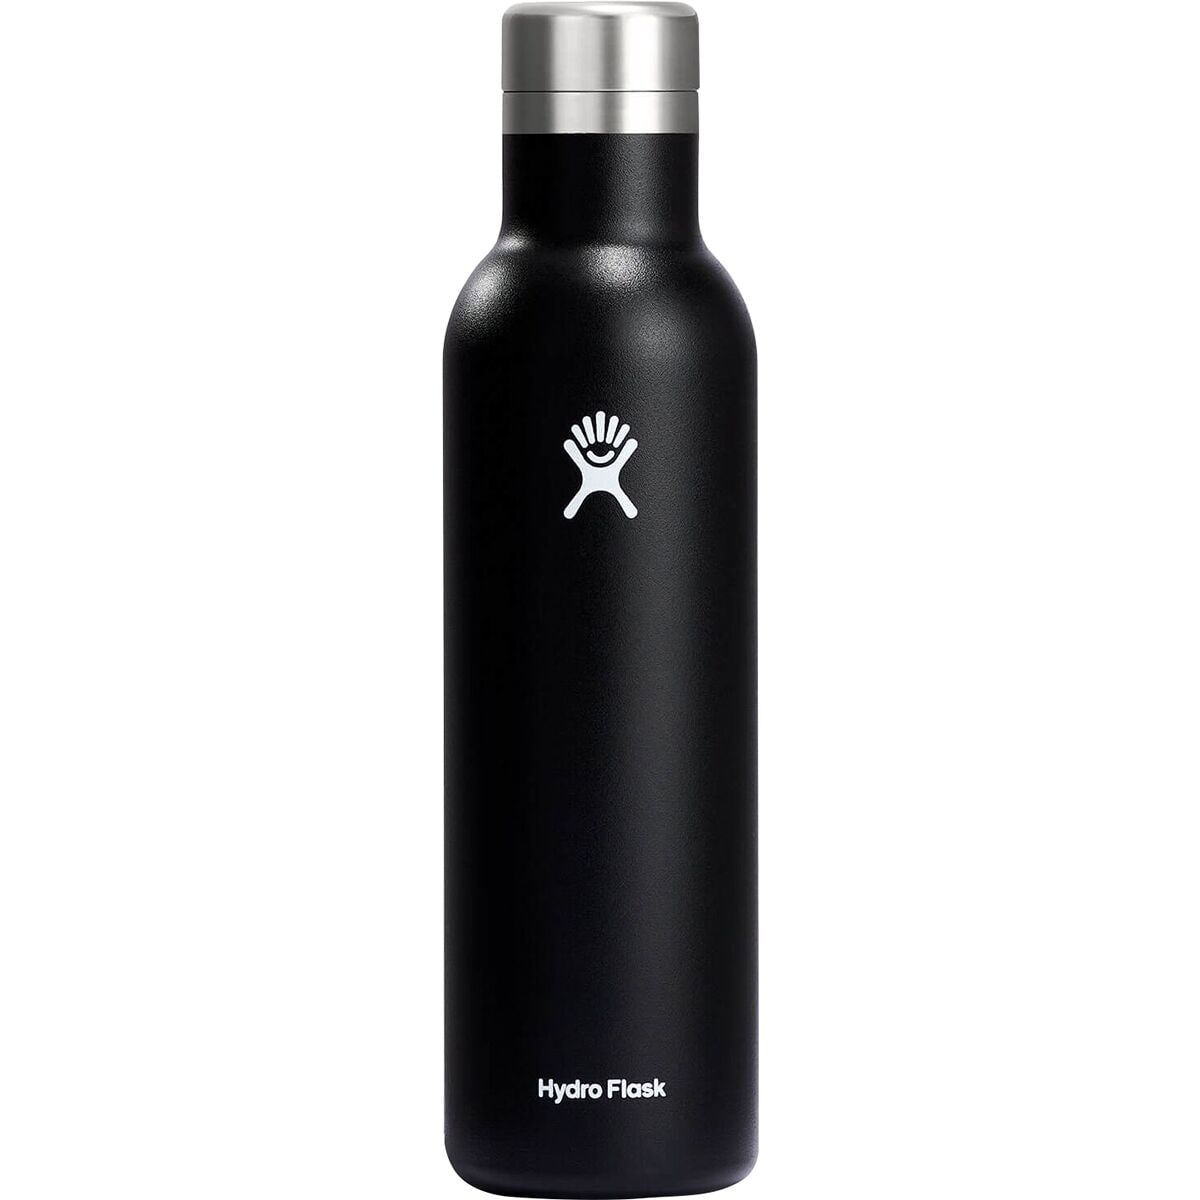 Replacement Gasket? : r/Hydroflask